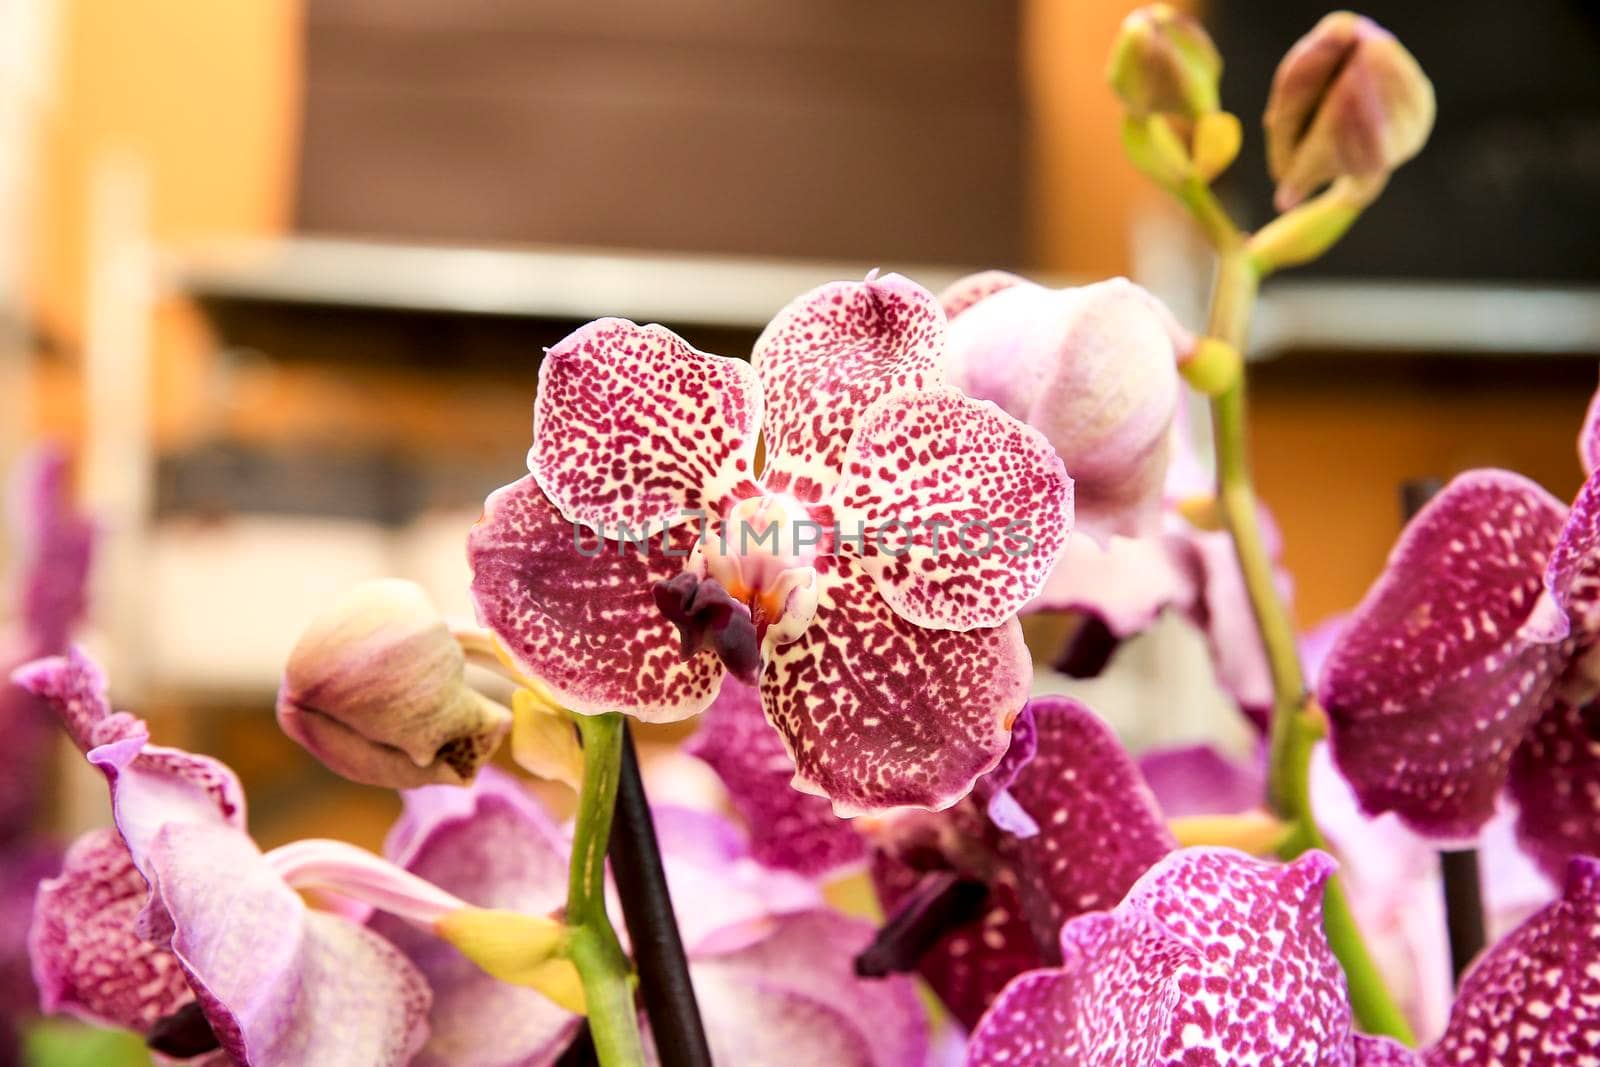 Beautiful and colorful pink Phalenopsis Orchid plants in the garden in Spring under the sun